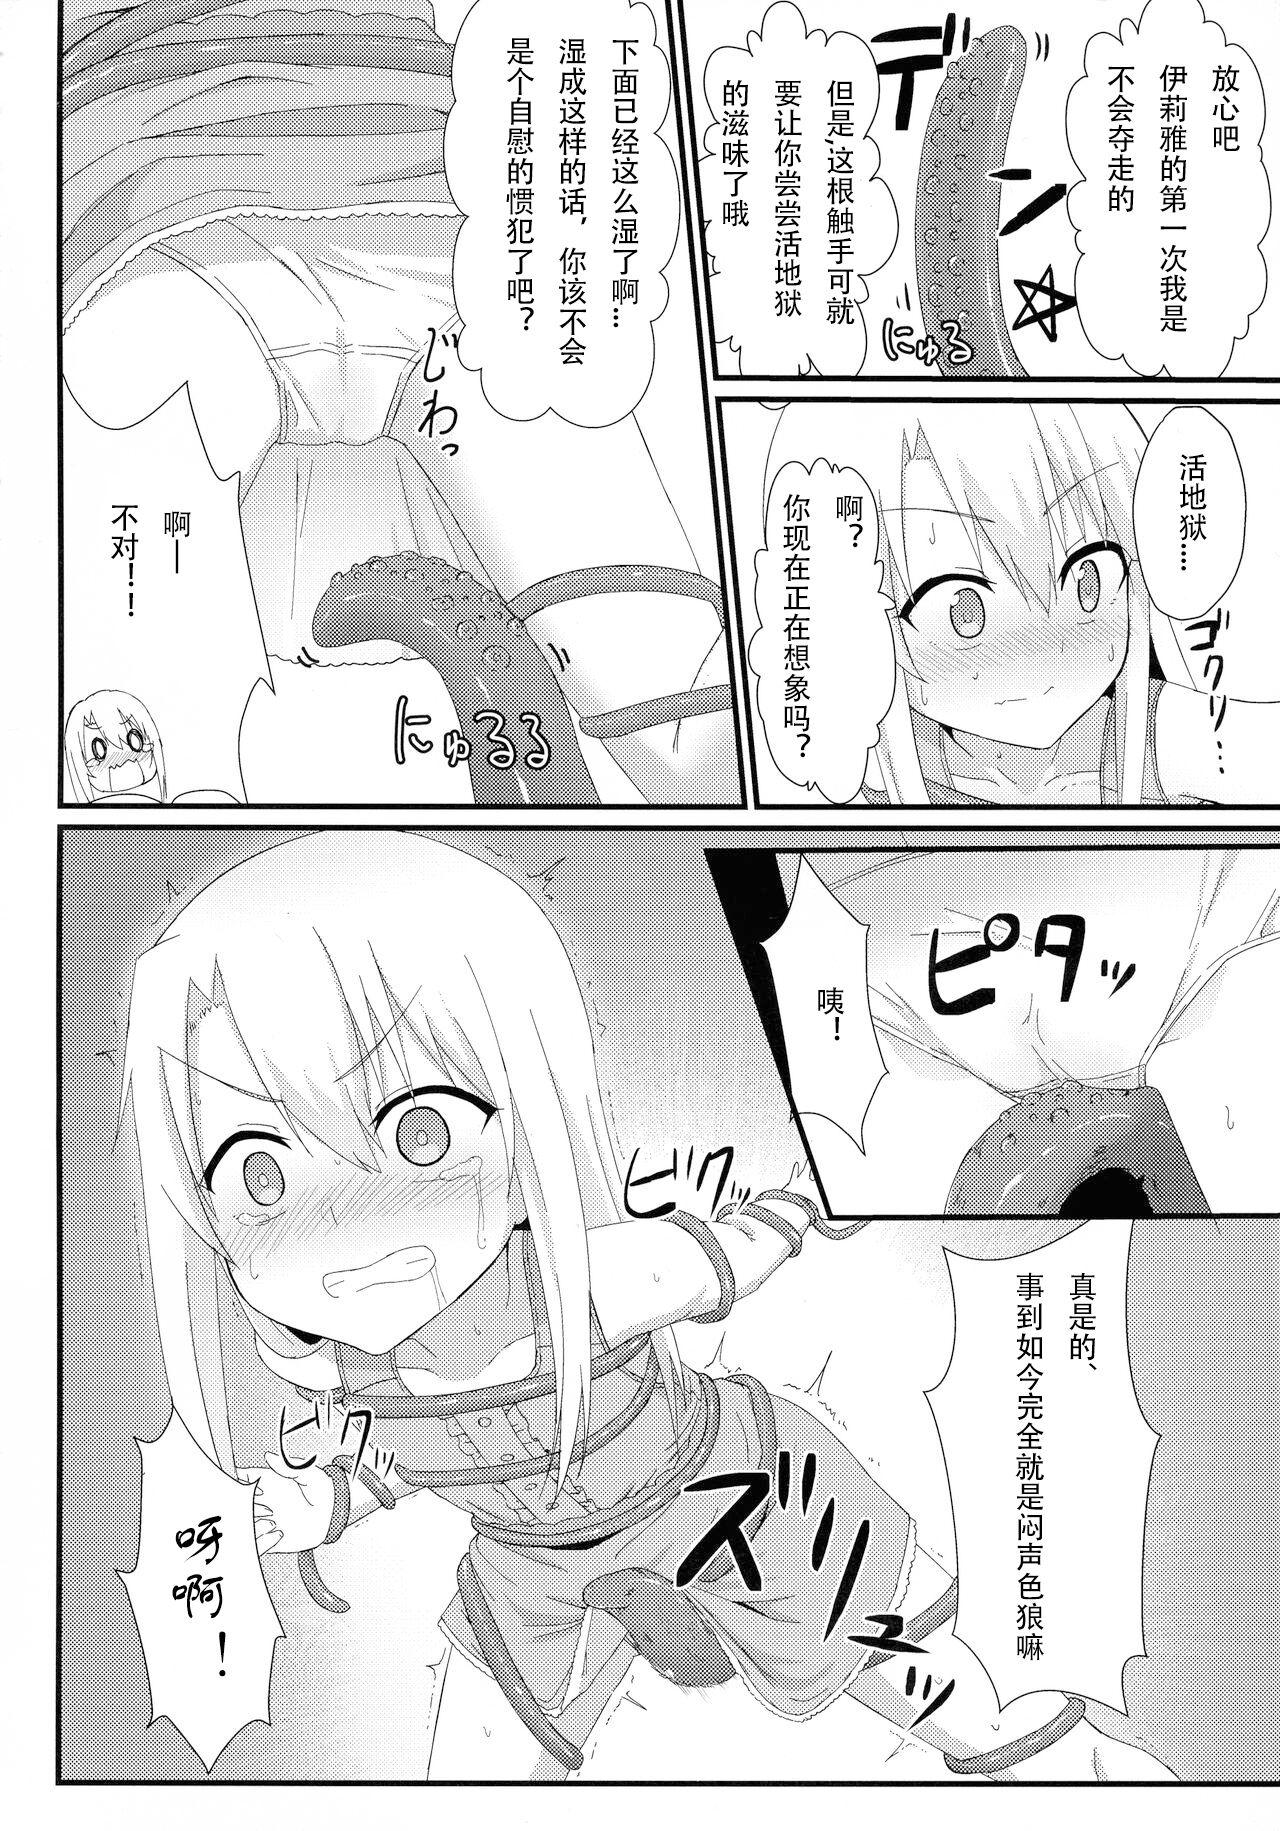 Pete Illya to Ruby Etchi Etchi Secret Function - Fate kaleid liner prisma illya Pain - Page 6